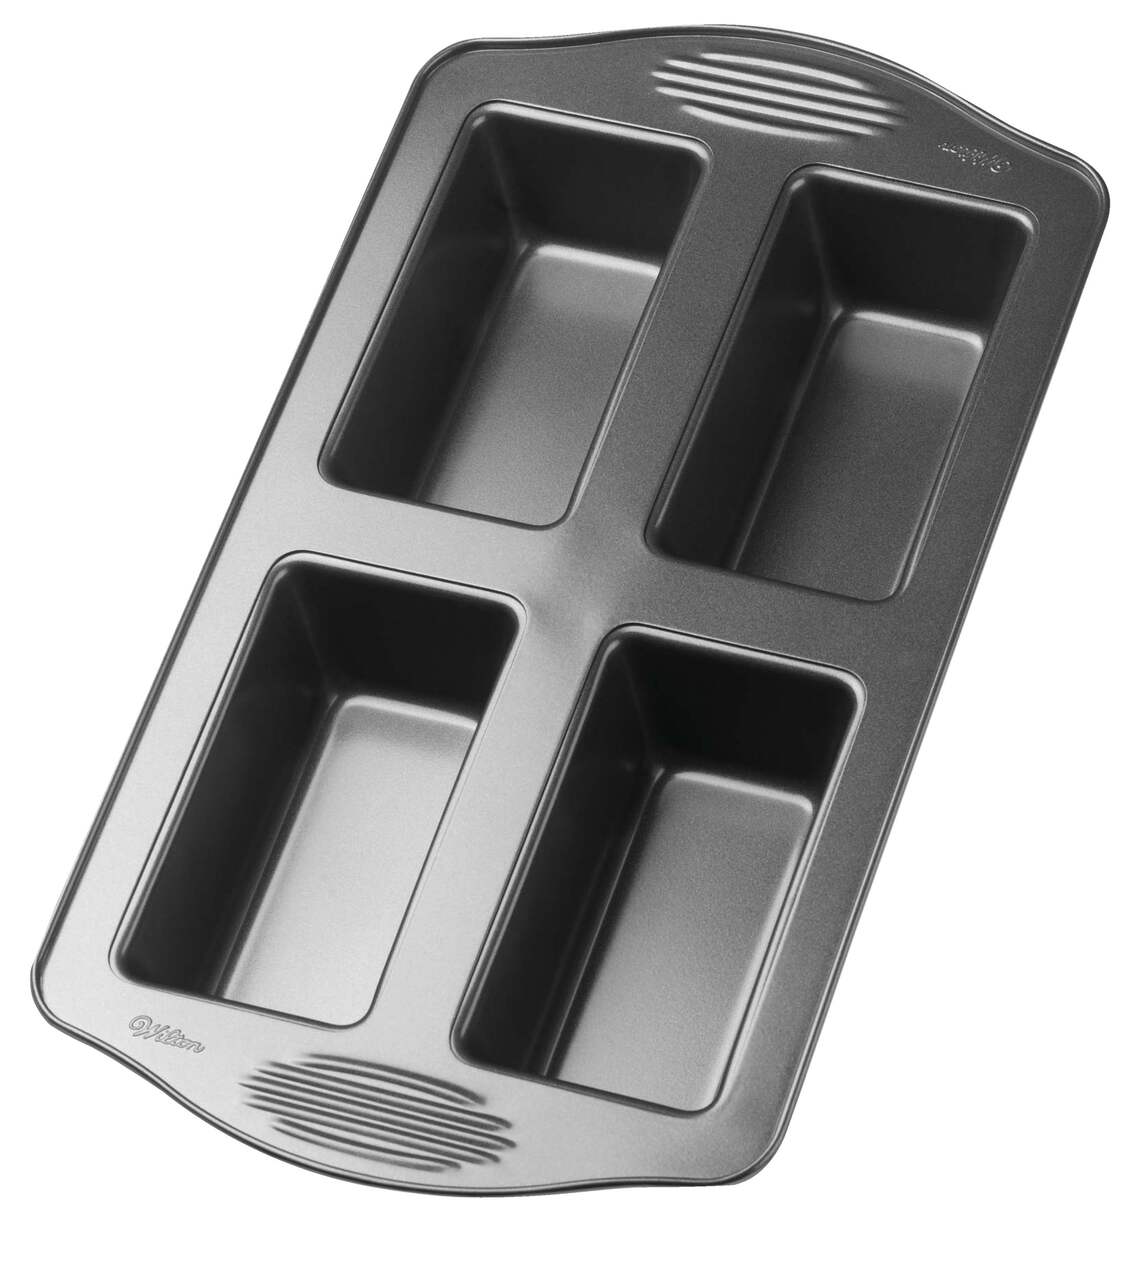 https://media-www.canadiantire.ca/product/living/kitchen/bakeware-baking-prep/1425489/wilton-gourmet-choice-4-cavity-loaf-eec4cbf2-058a-4ece-bb50-5a00ac35ebed-jpgrendition.jpg?imdensity=1&imwidth=640&impolicy=mZoom